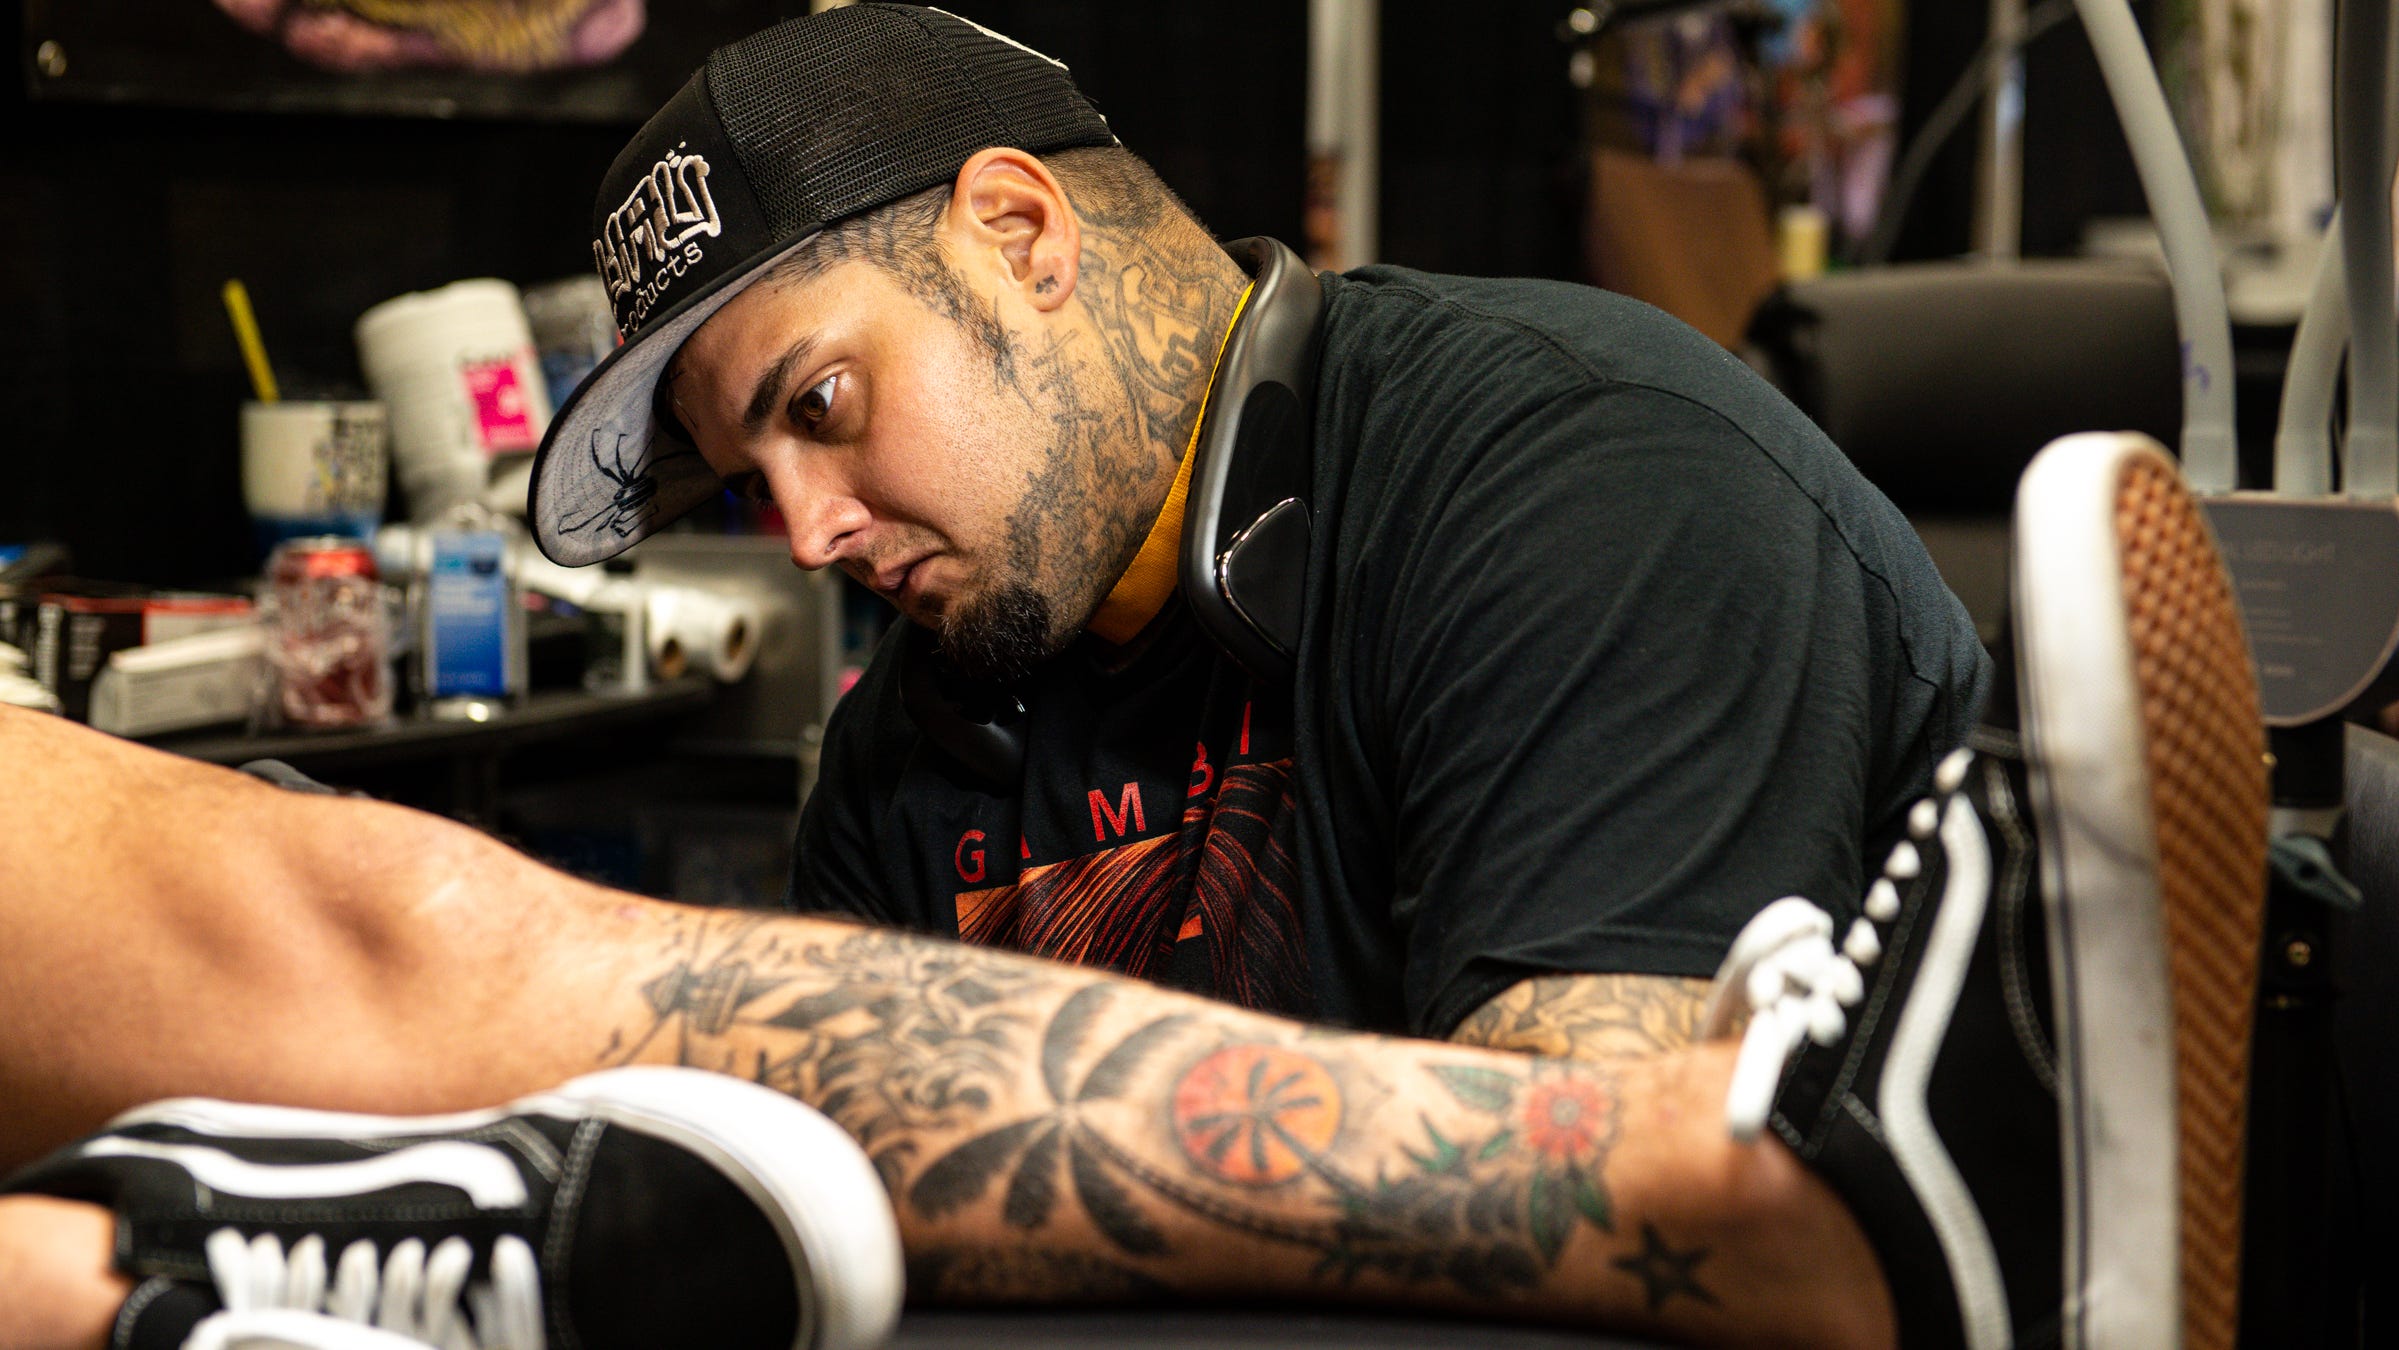 Here's 5 tattoo enthusiasts the Caller-Times met at convention